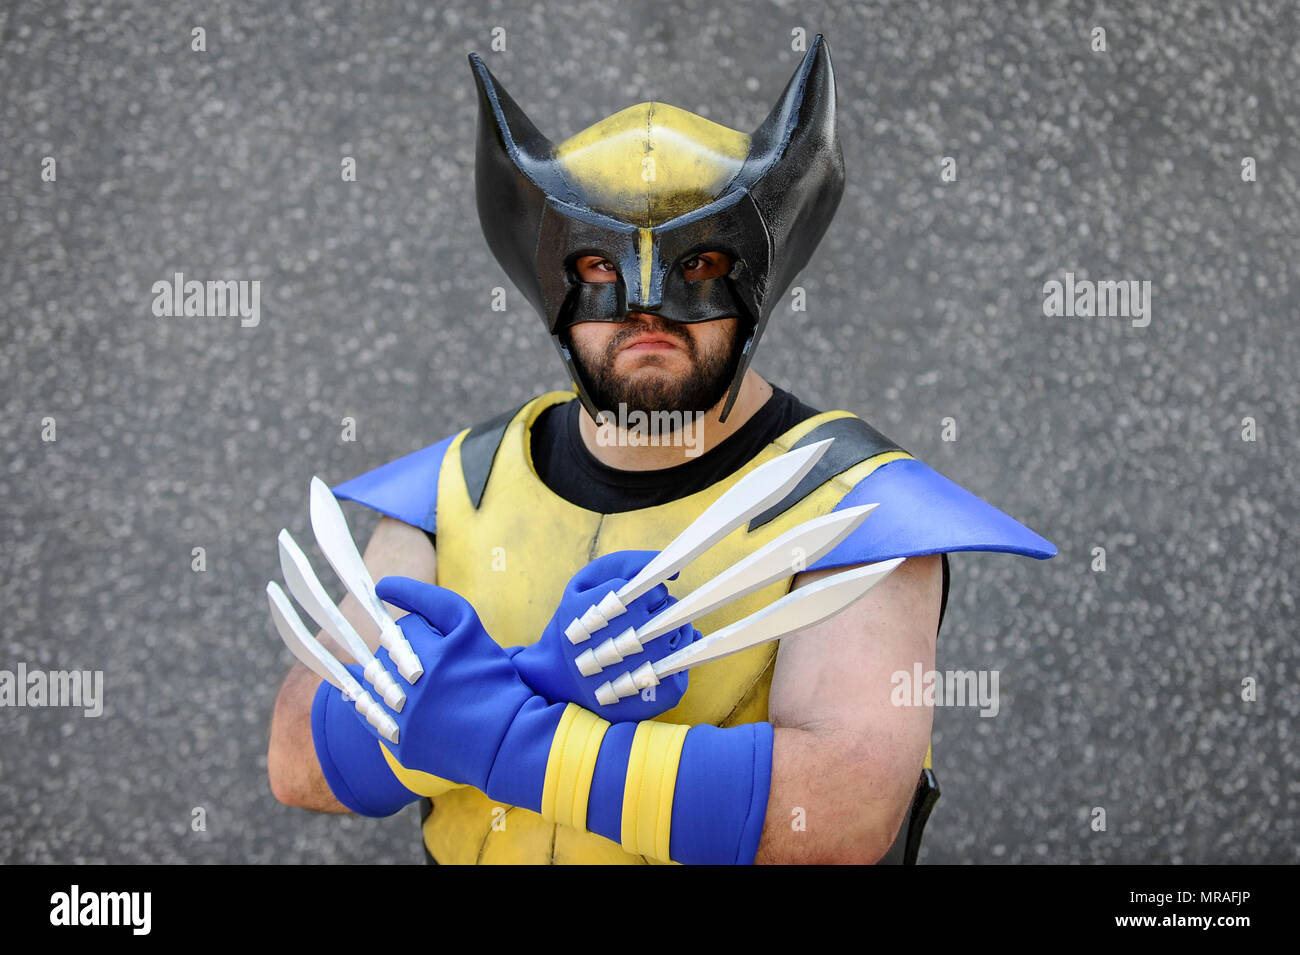 London, UK. 26 May 2018. A man dressed as Wolverine from X-Men joins  cosplayers attending day two of MCM Comic Con at Excel in East London.  Thousands of fans of video games,